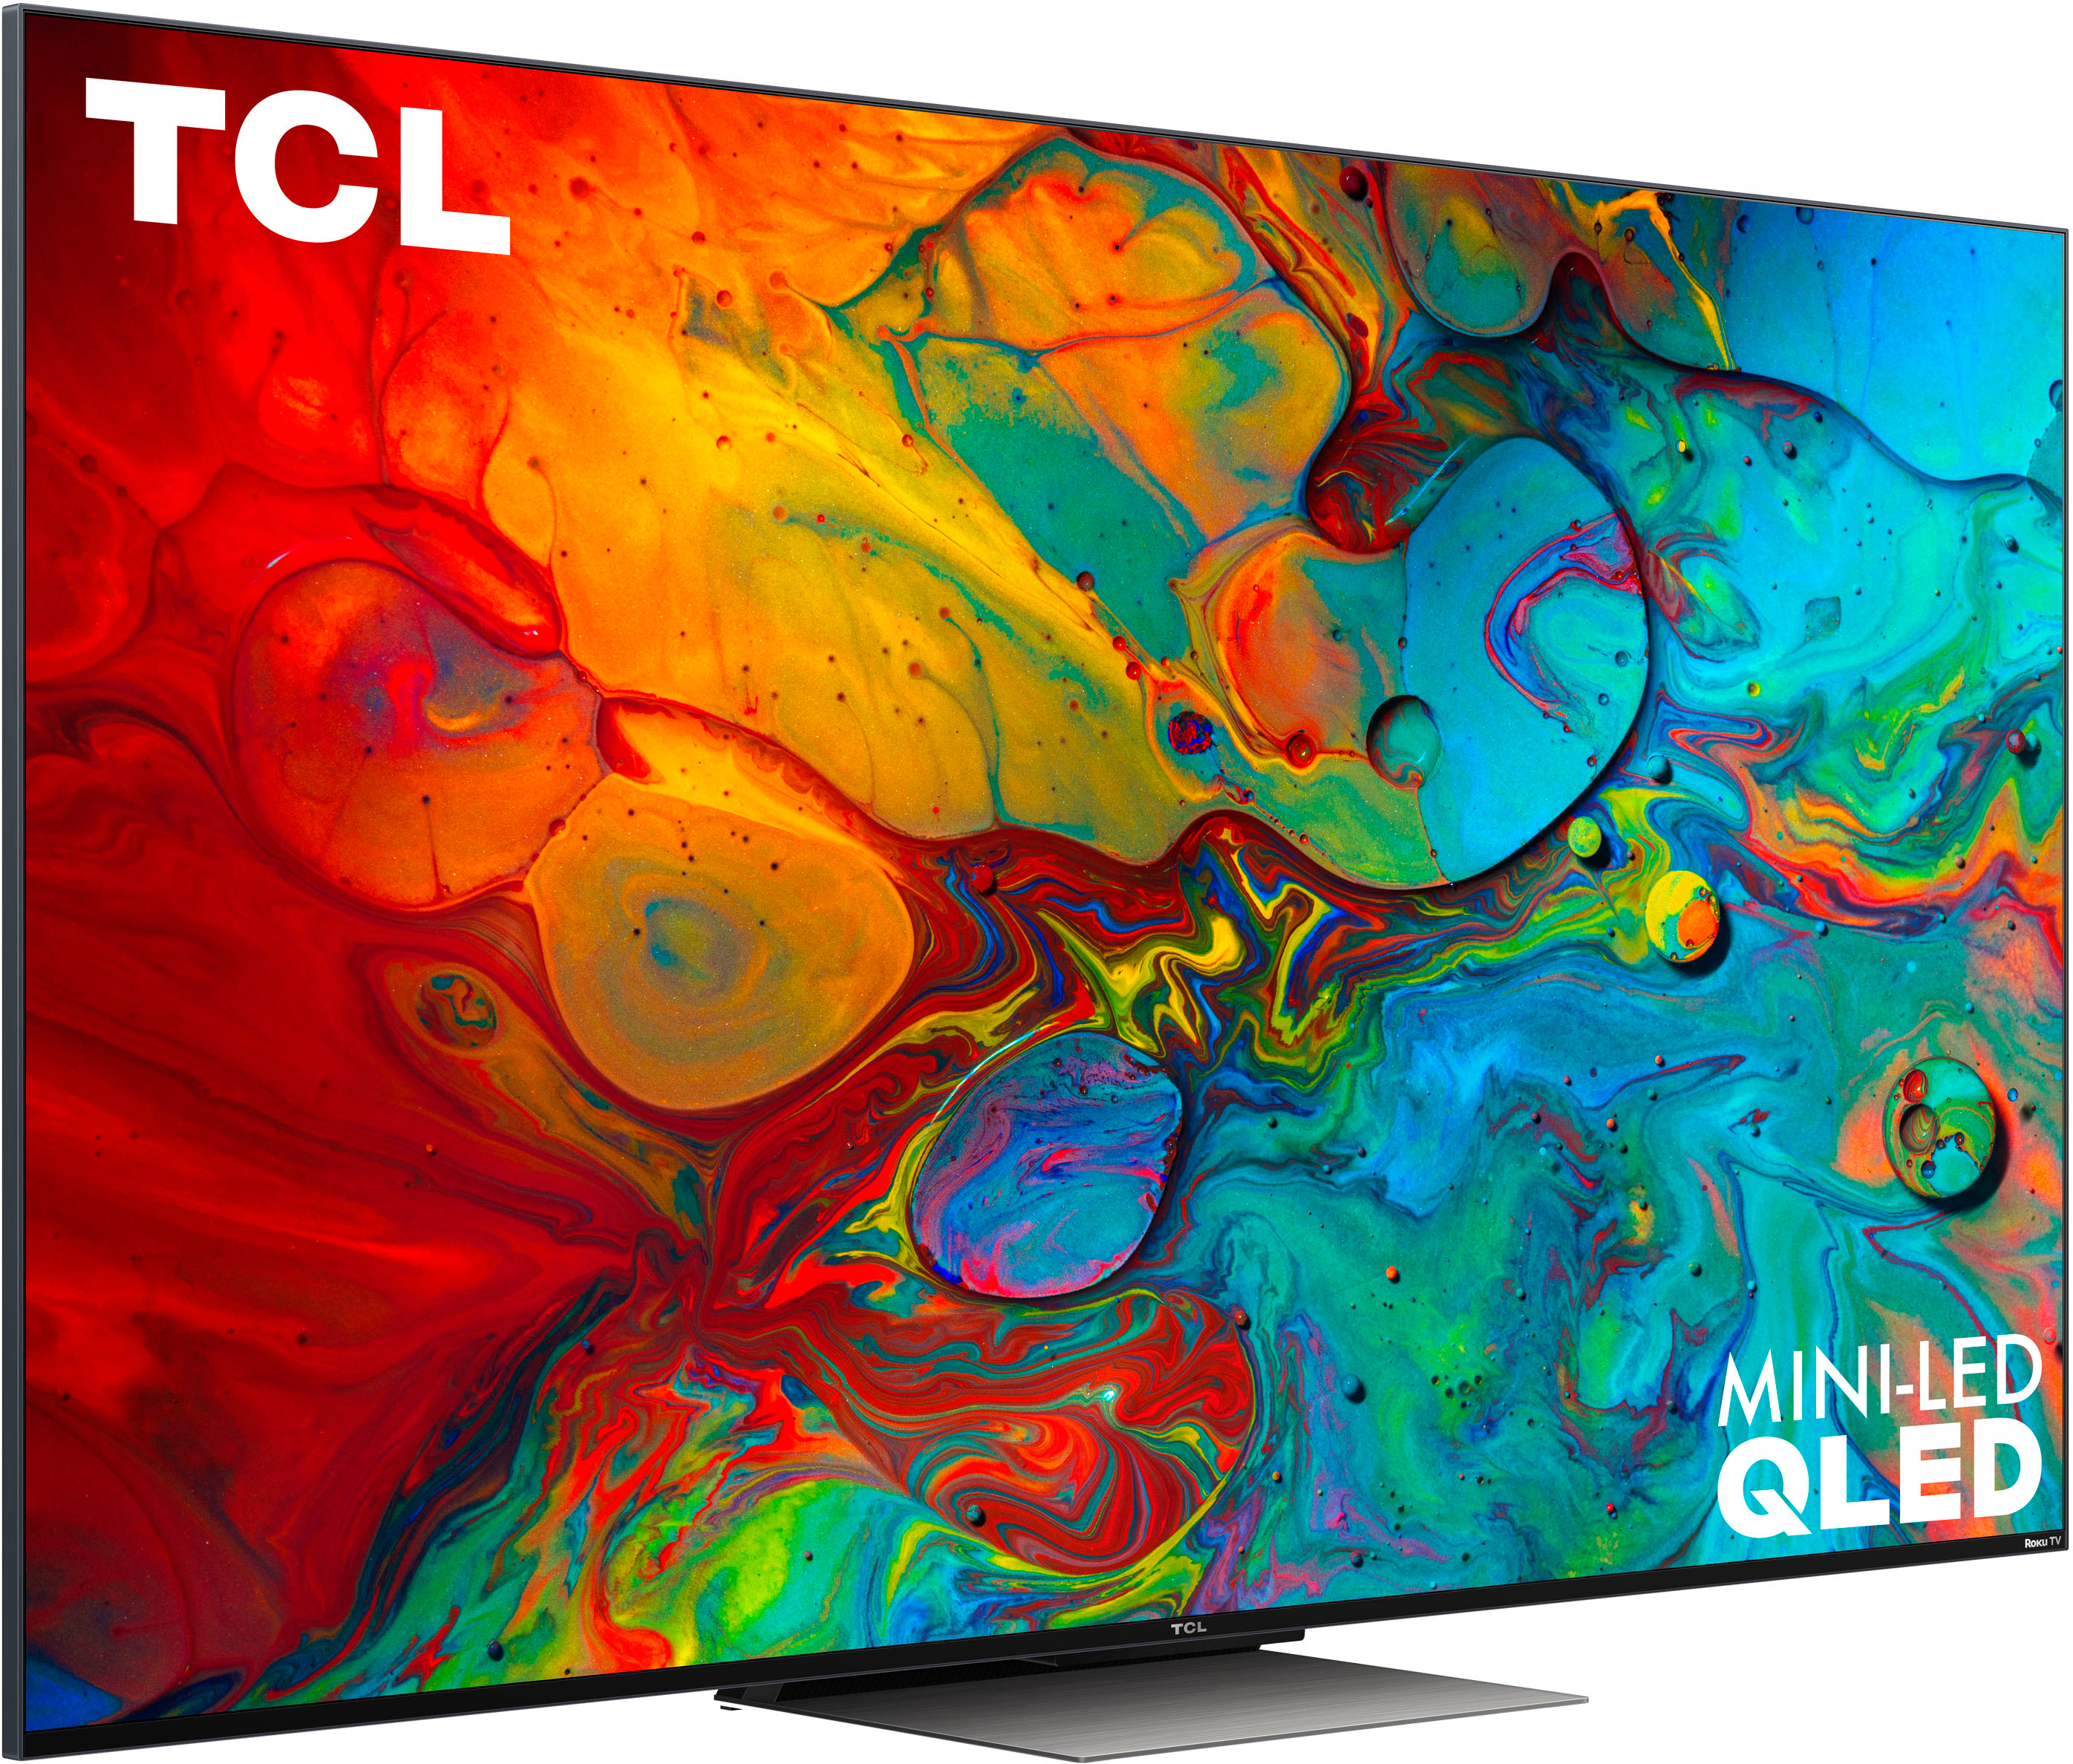 TCL 55 Class 6-Series 4K QLED Dolby Vision HDR Roku Smart TV - 55R625